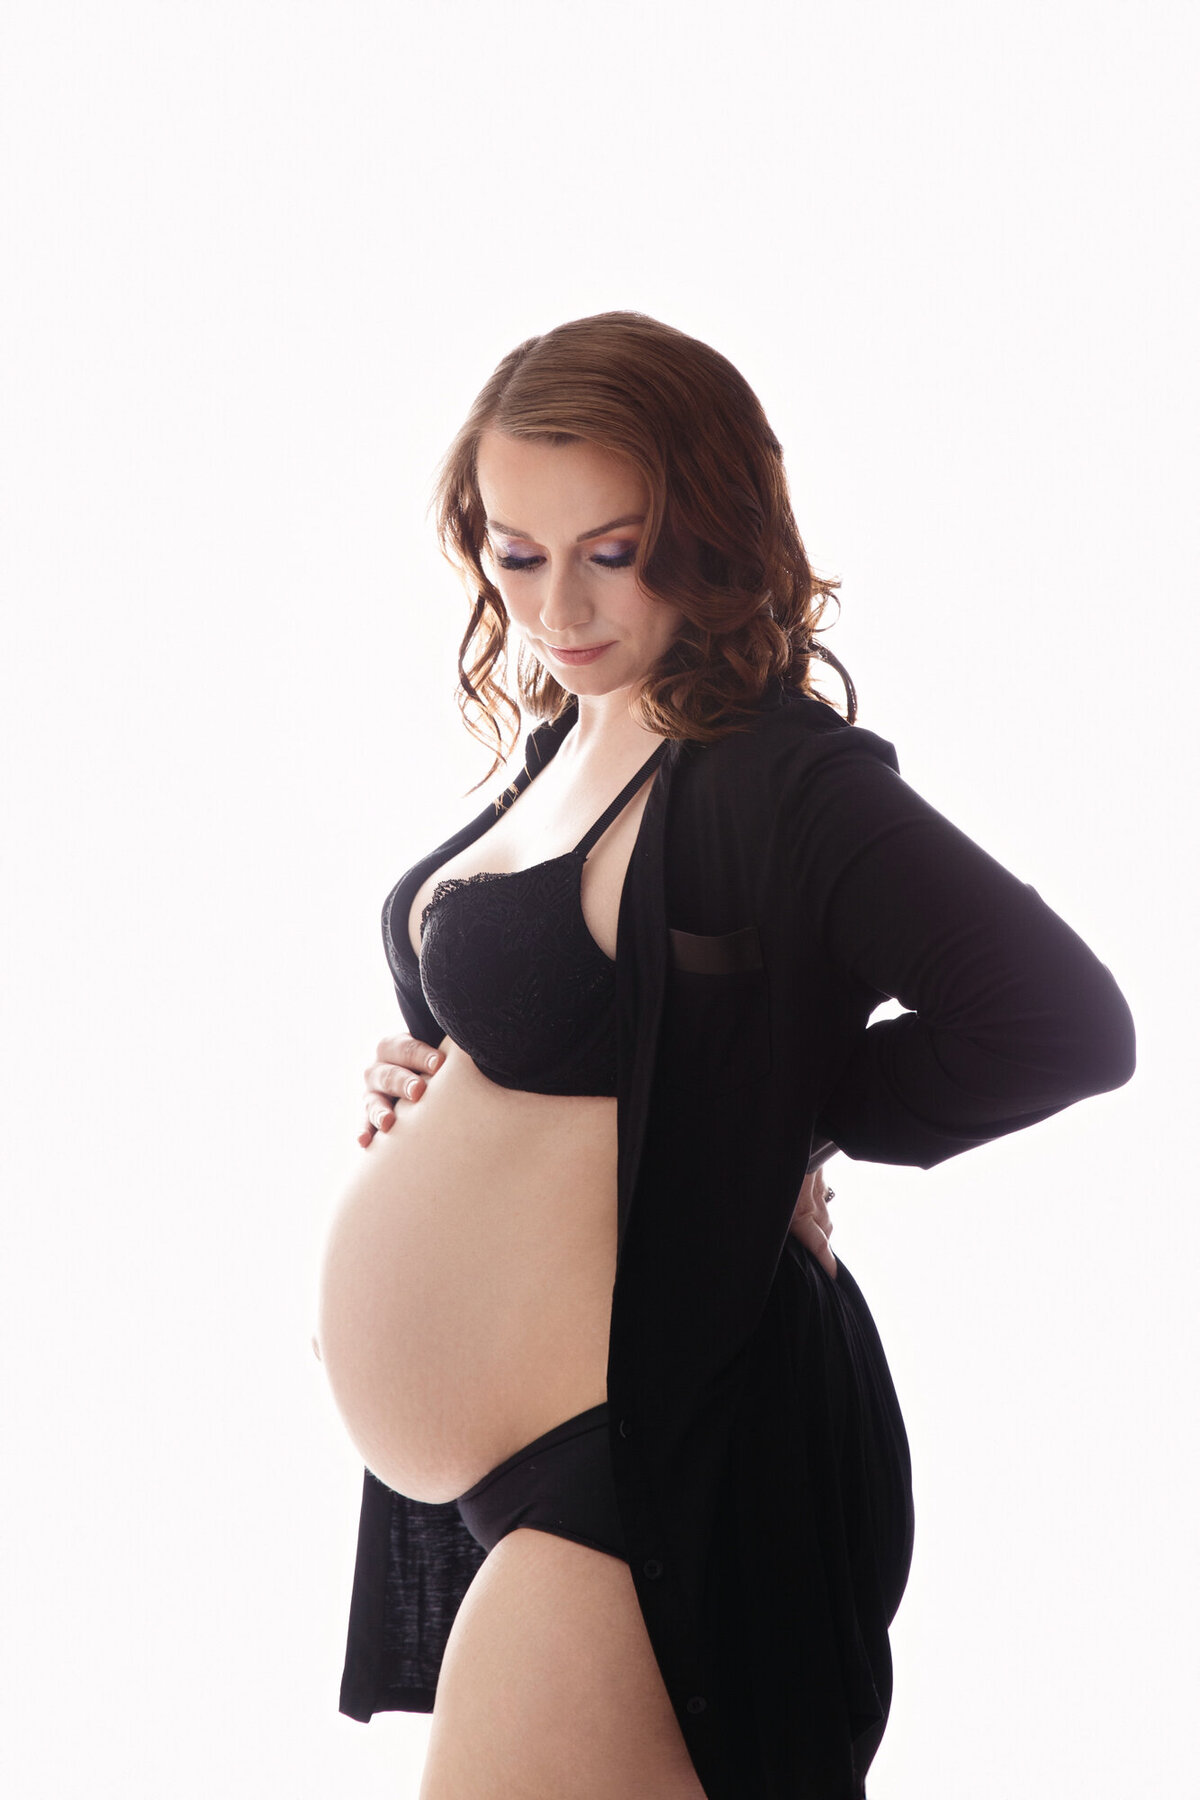 Studio shot of a beautiful pregnant woman wearing a black shirt and showing her baby belly